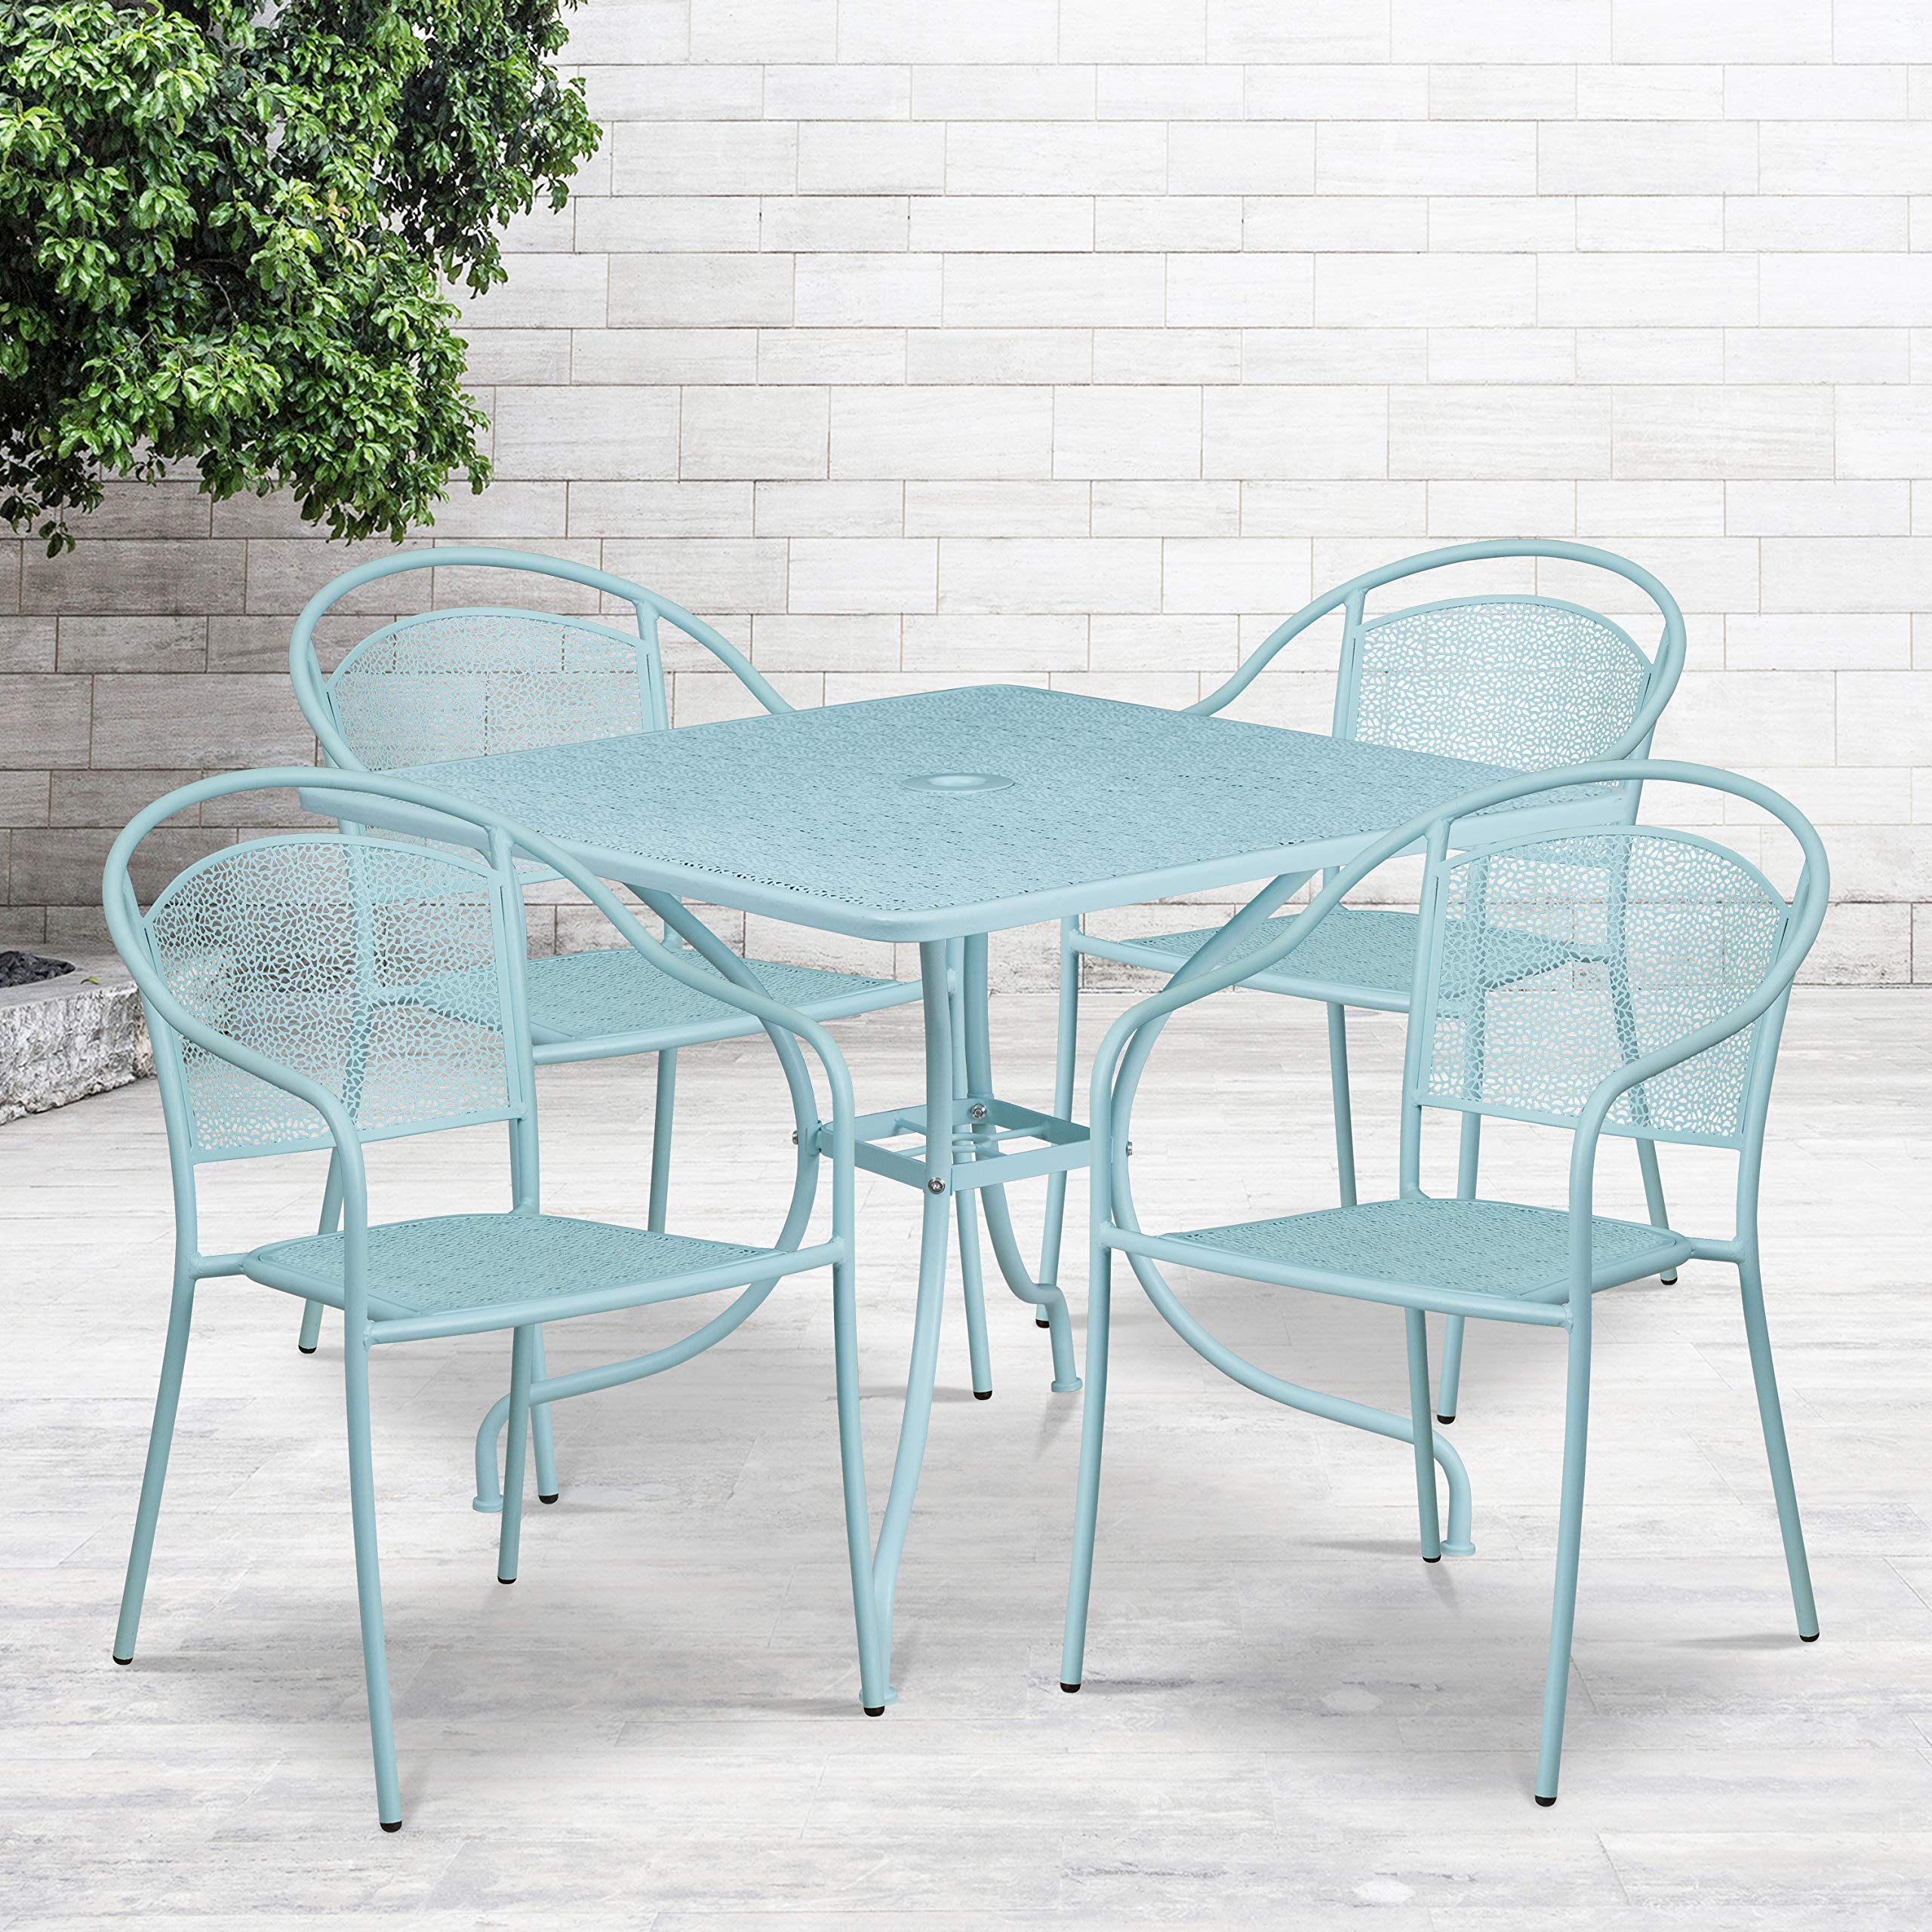 Flash Furniture Oia Commercial Grade 35.5" Square Sky Blue Indoor-Outdoor Steel Patio Table Set with 4 Round Back Chairs Sky Blue 35.5"